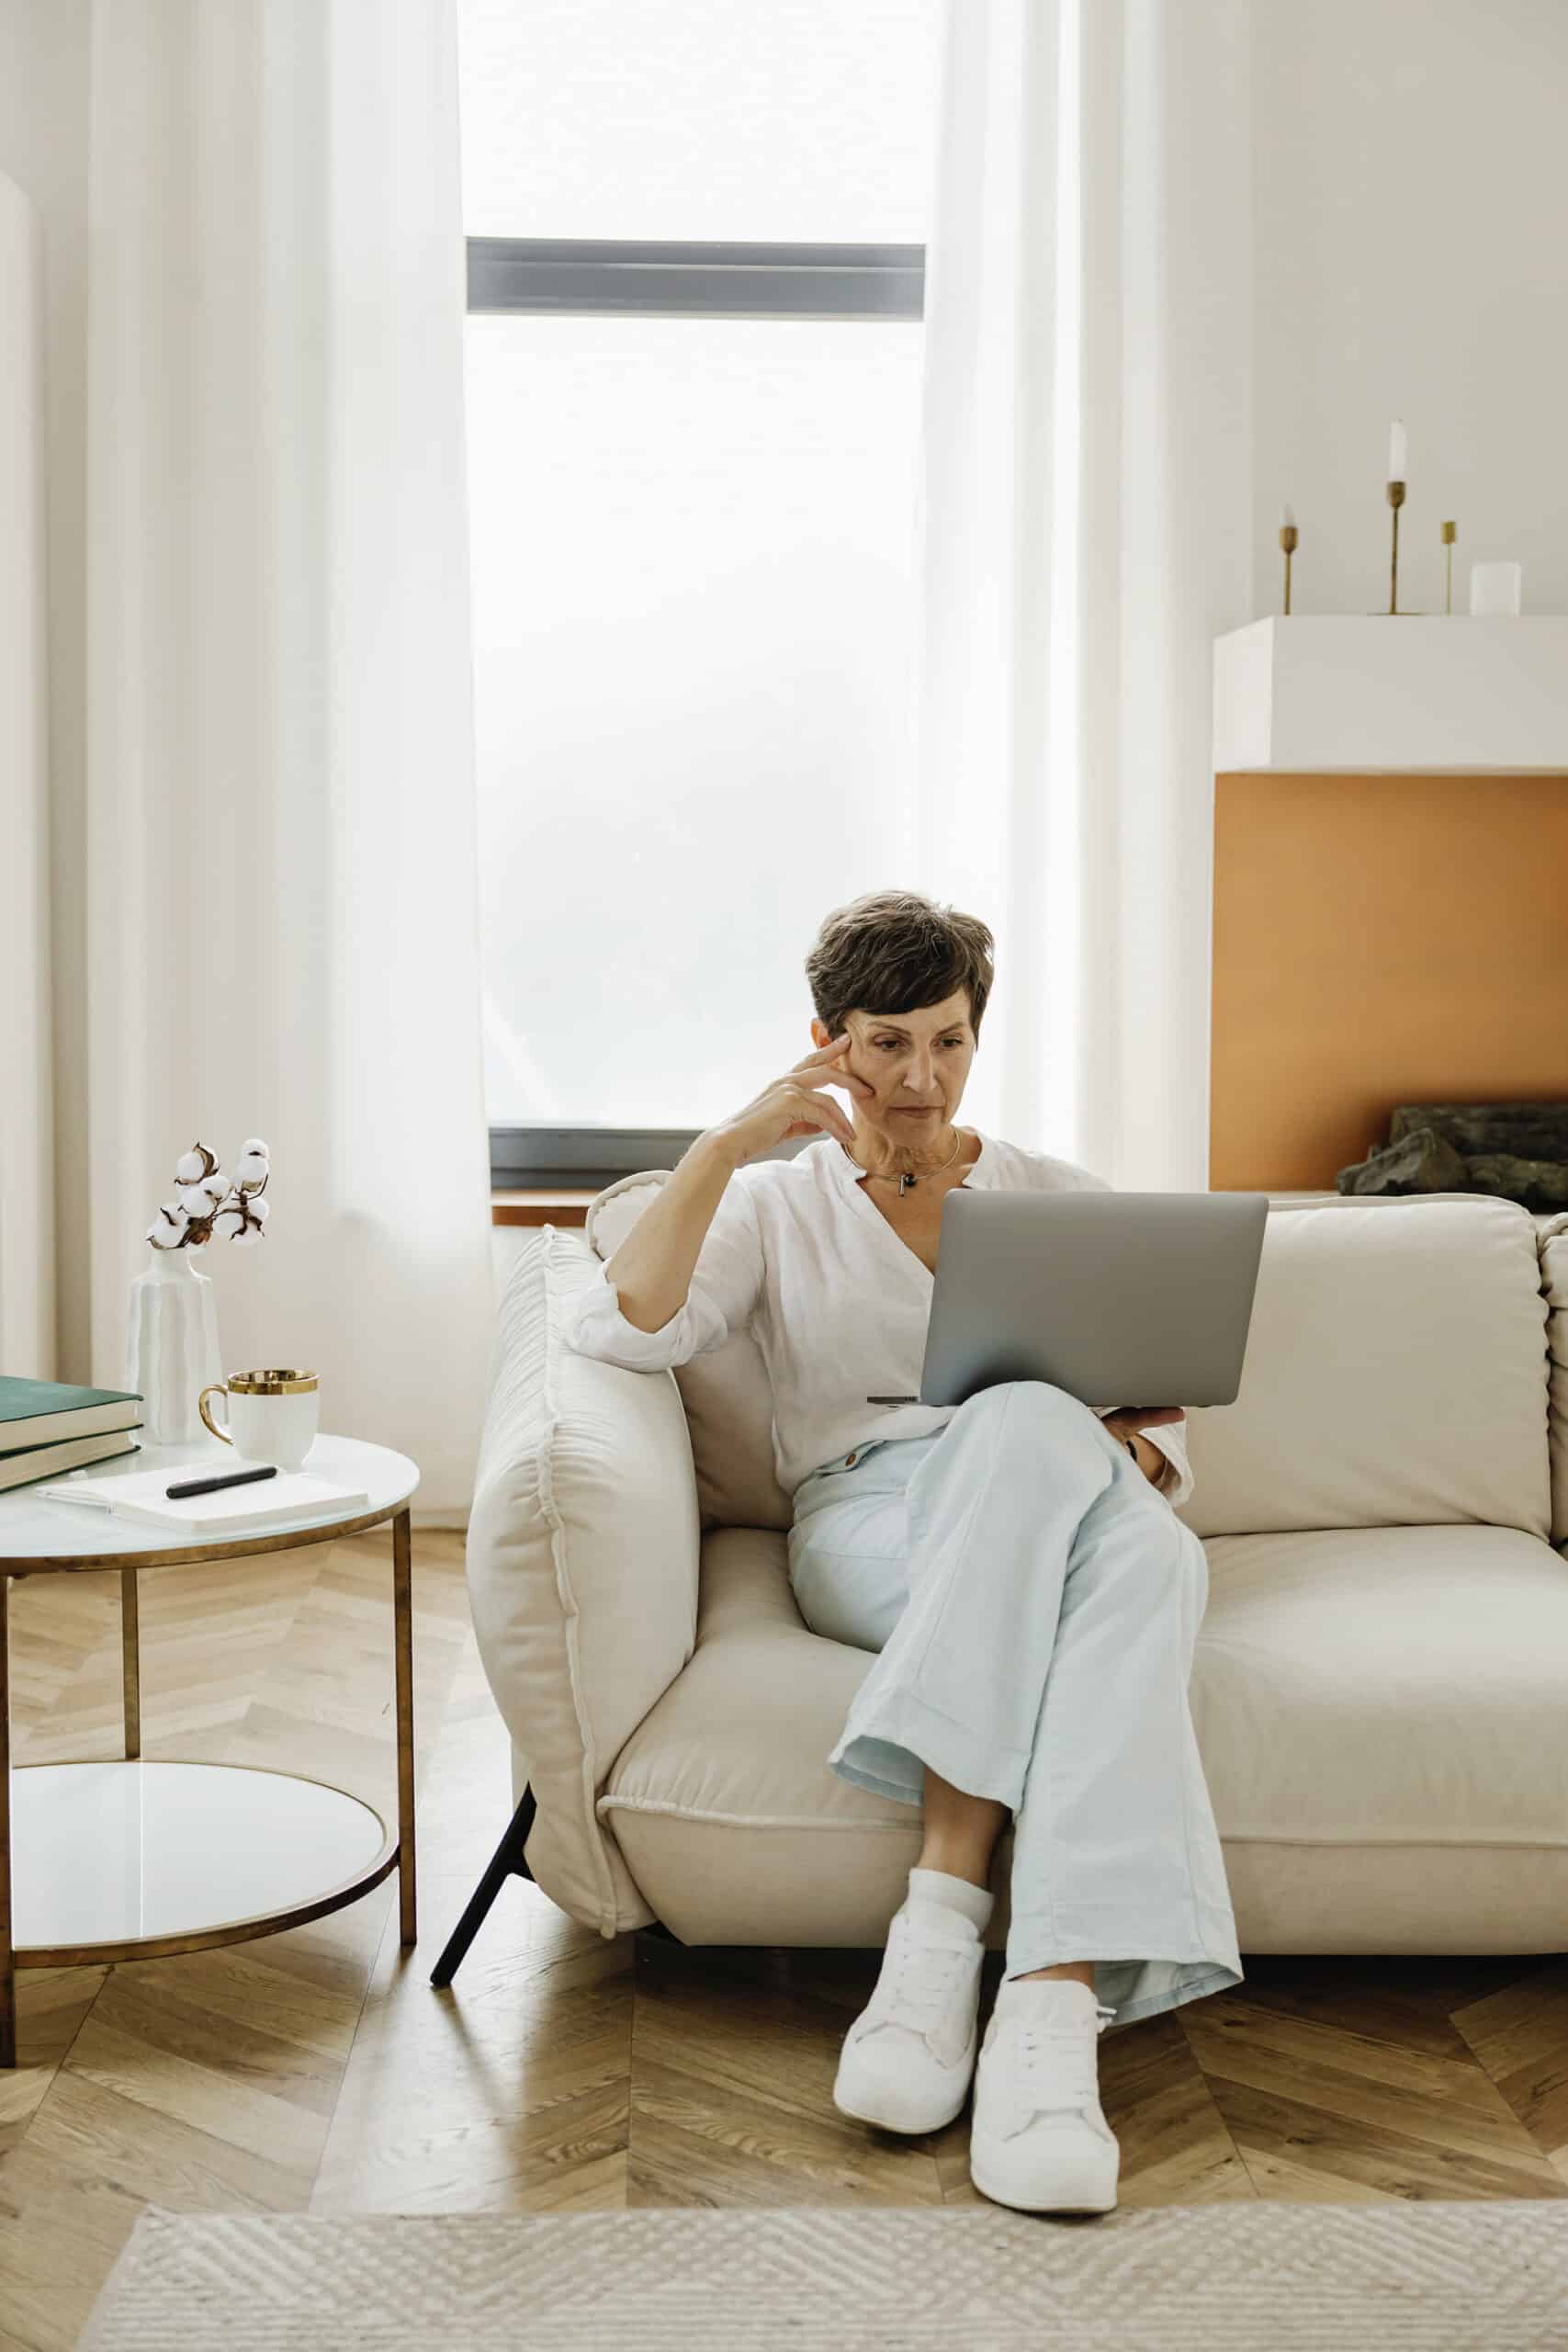 A woman sitting on a couch and using a laptop.